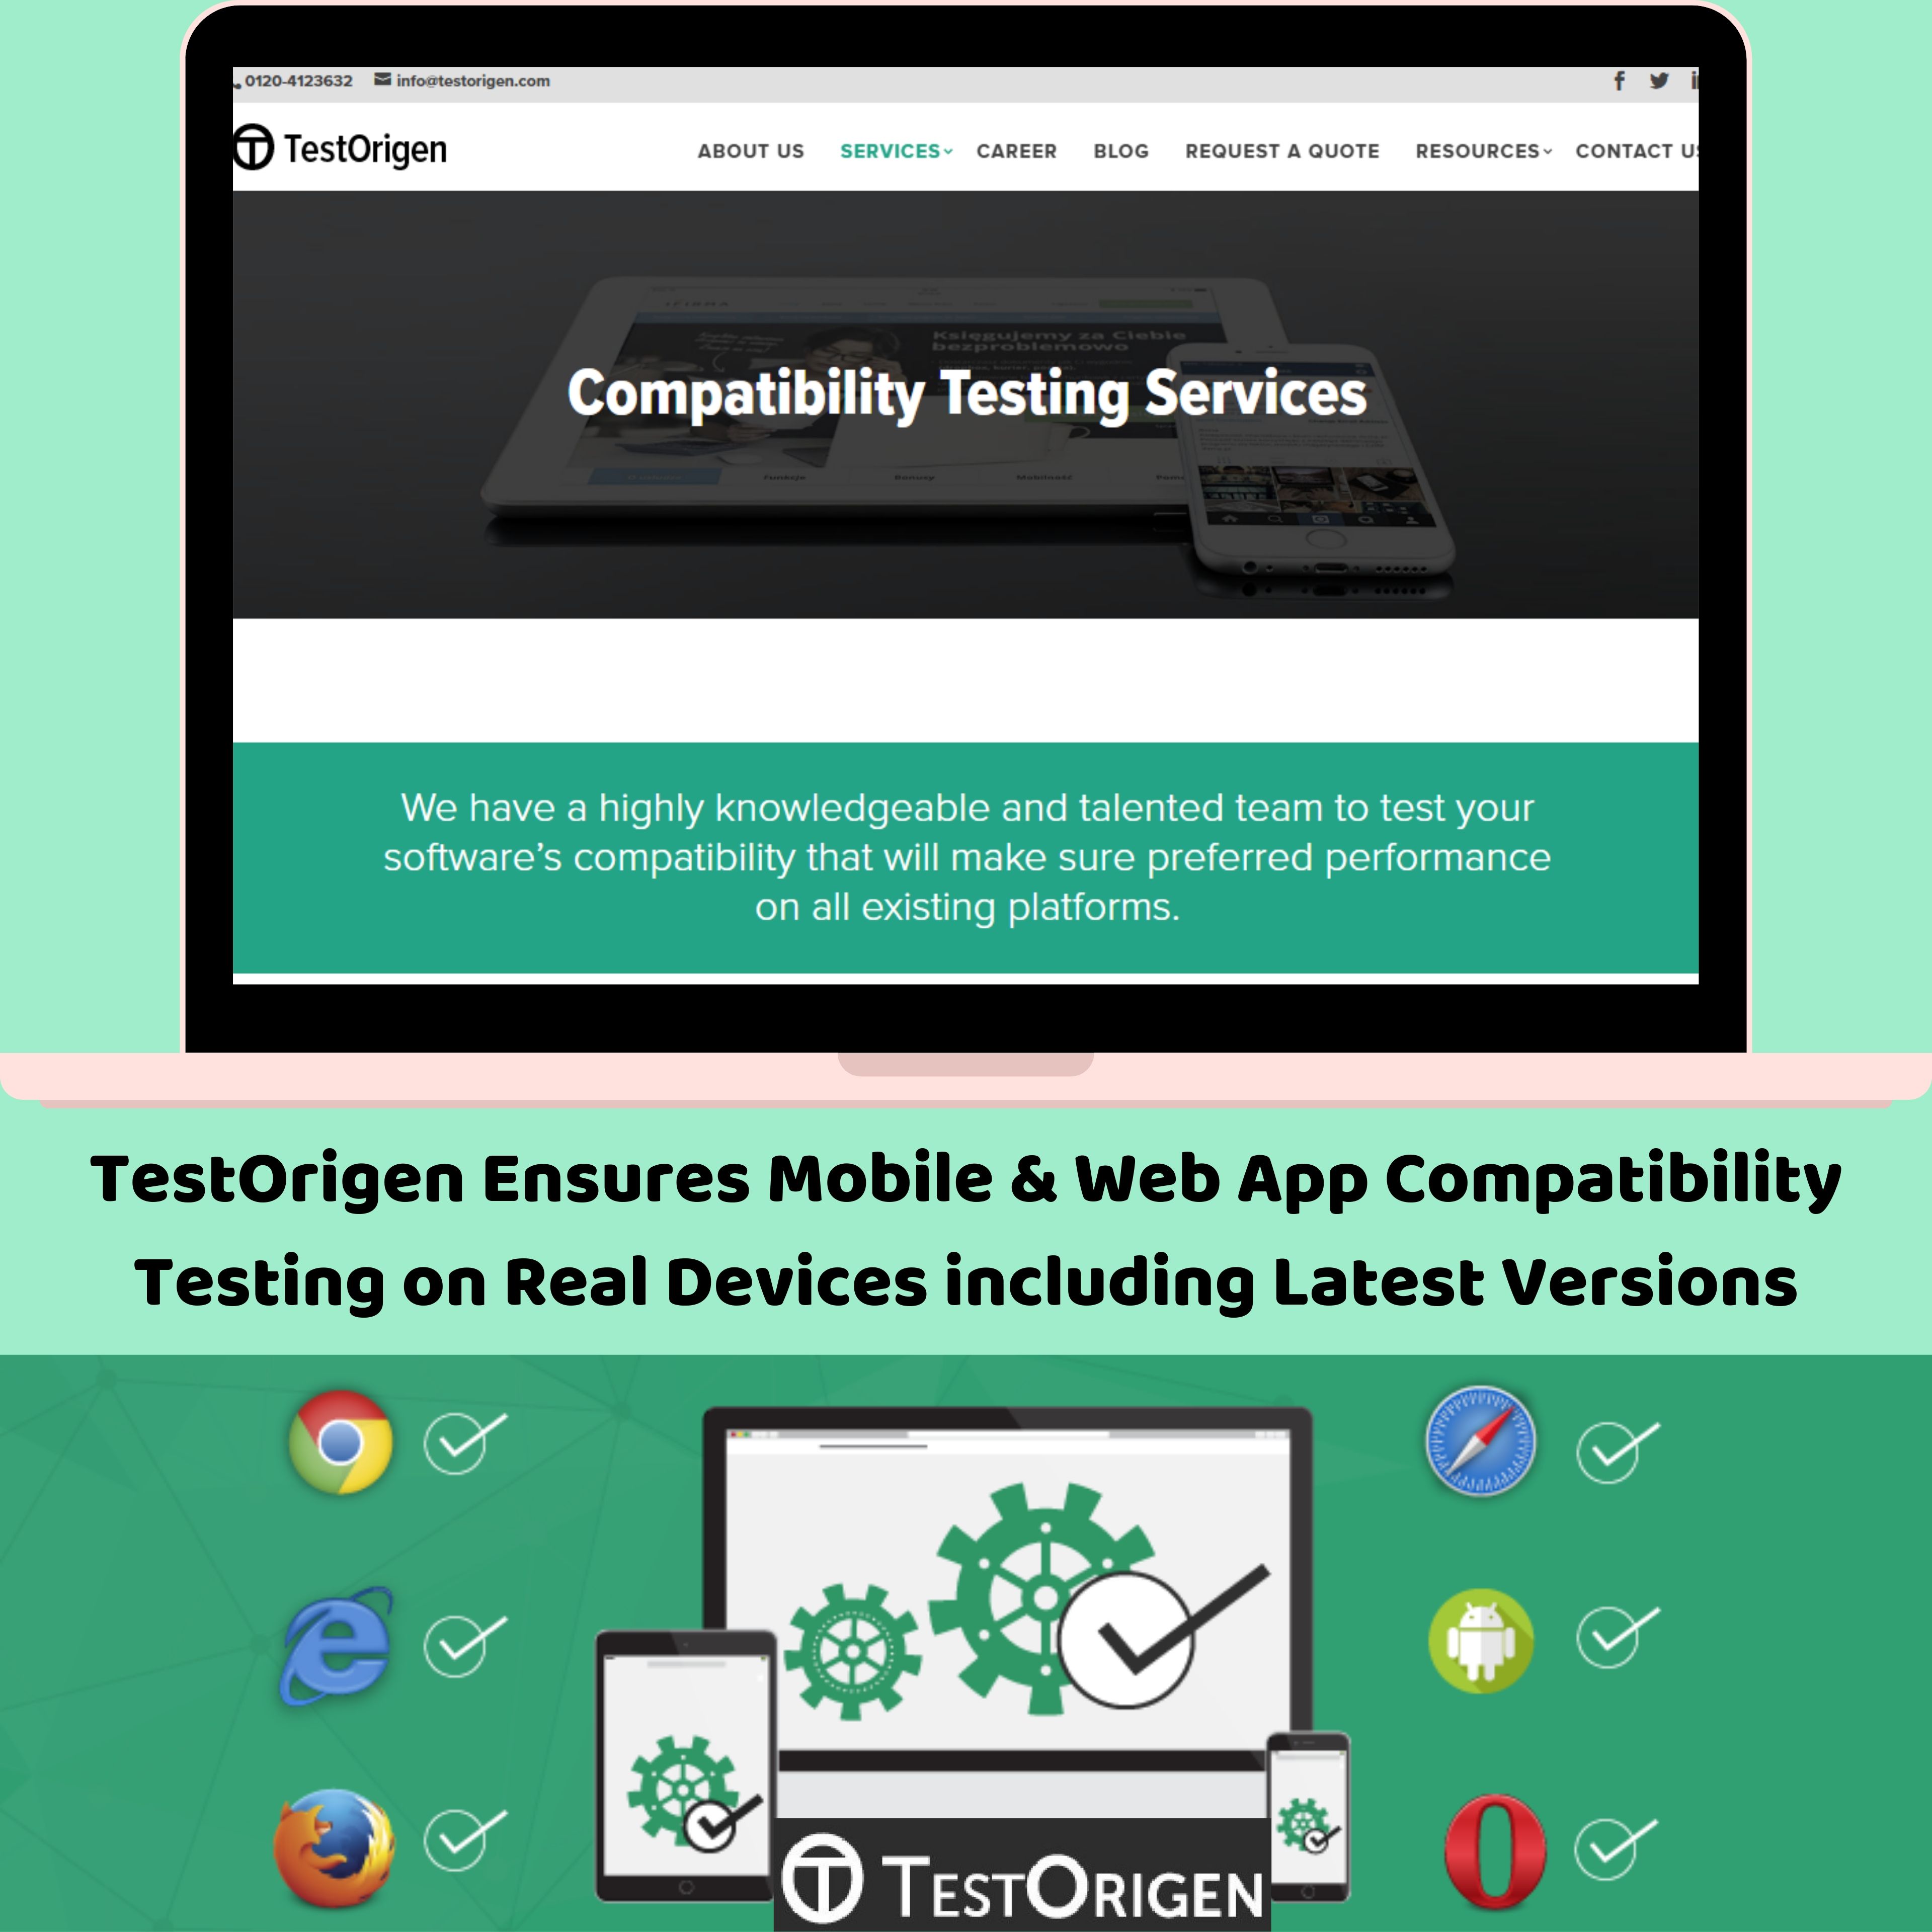 TestOrigen Ensures Mobile & Web App Compatibility Testing on Real Devices including Latest Versions